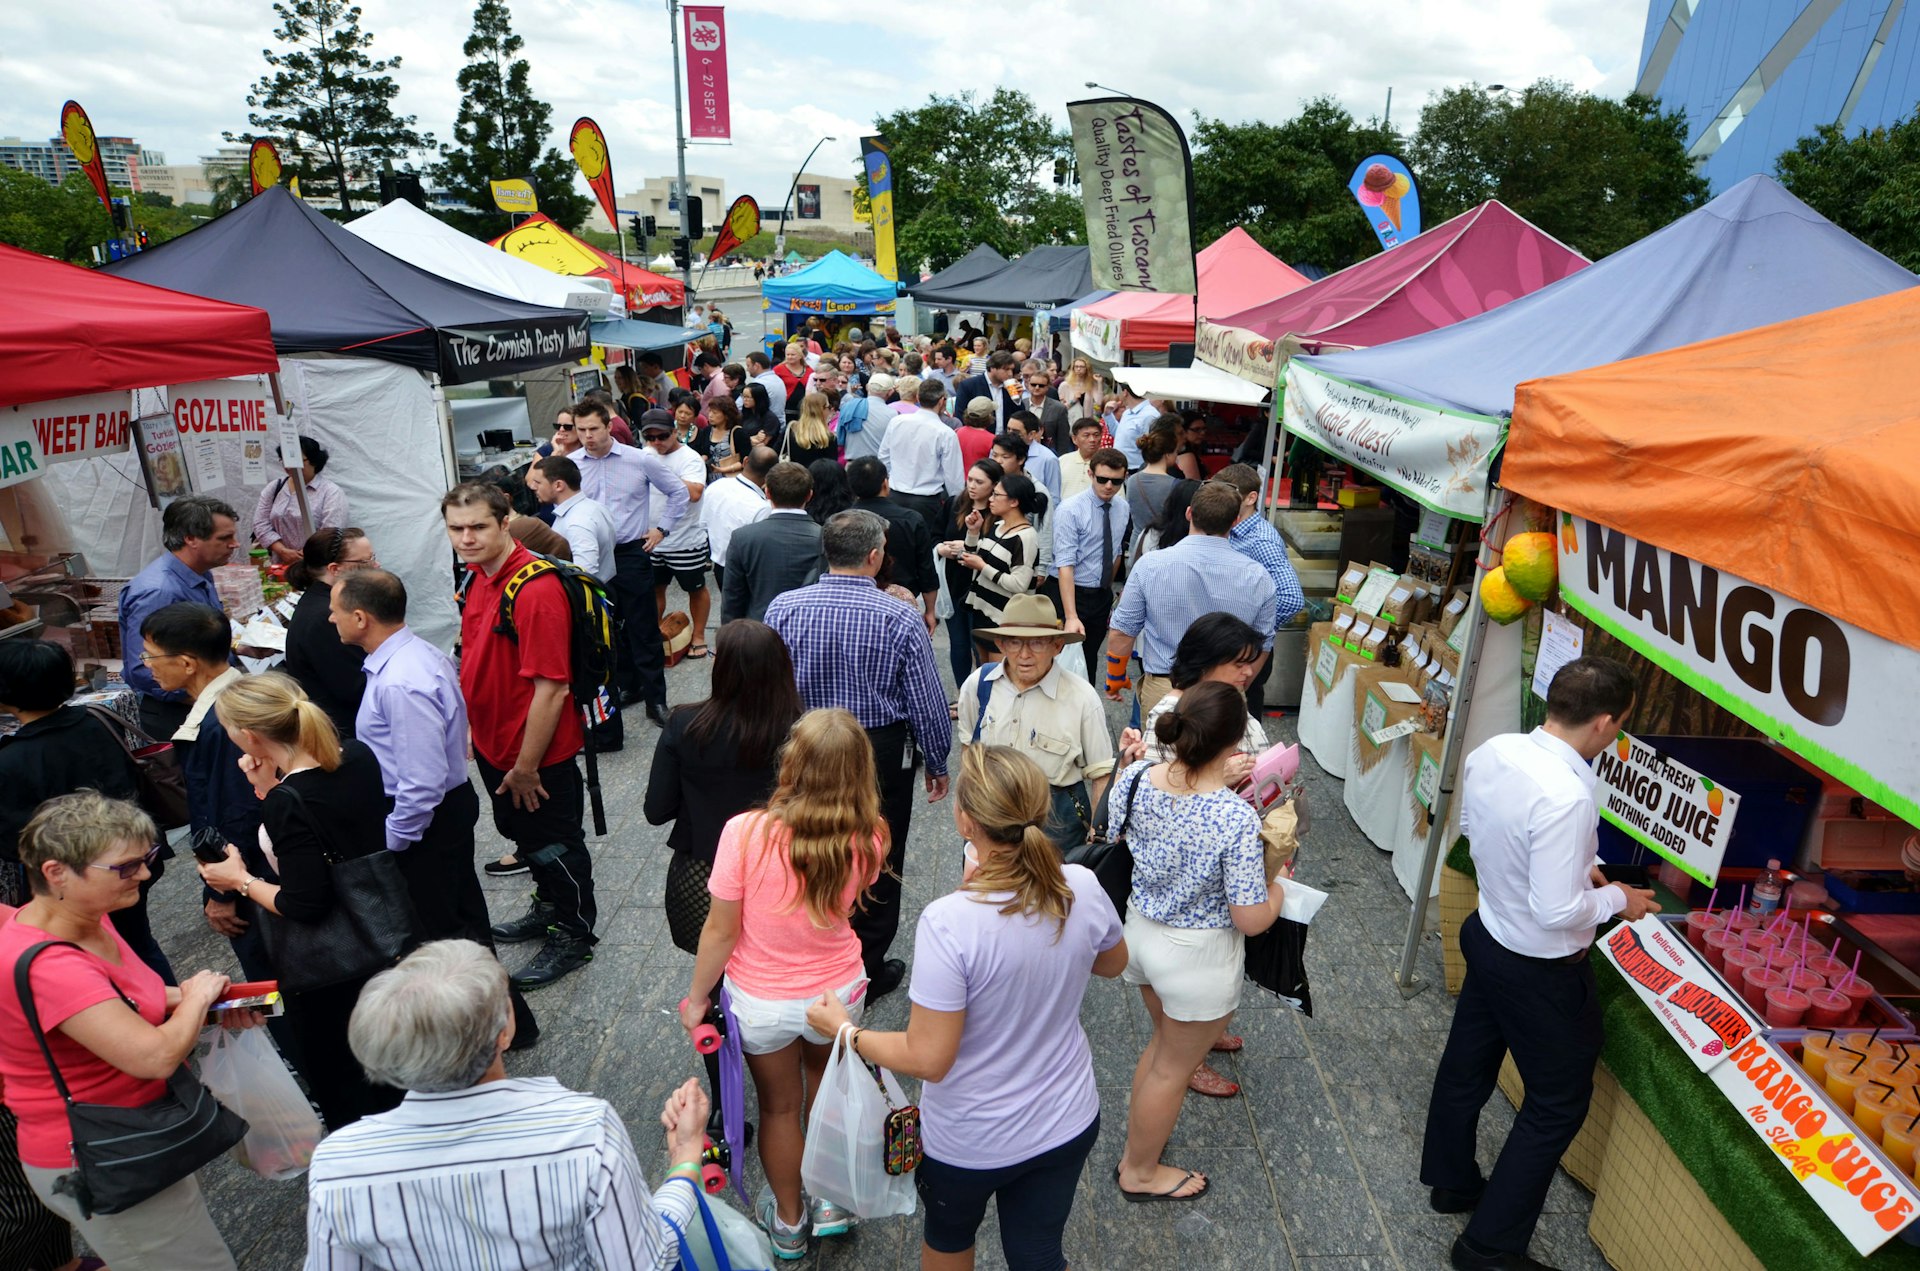 People shopping at Jan Powers Farmers Market in Brisbane City.It provide the best produce in Queensland of fresh fruits, vegetables and food to Brisbane, Australia.